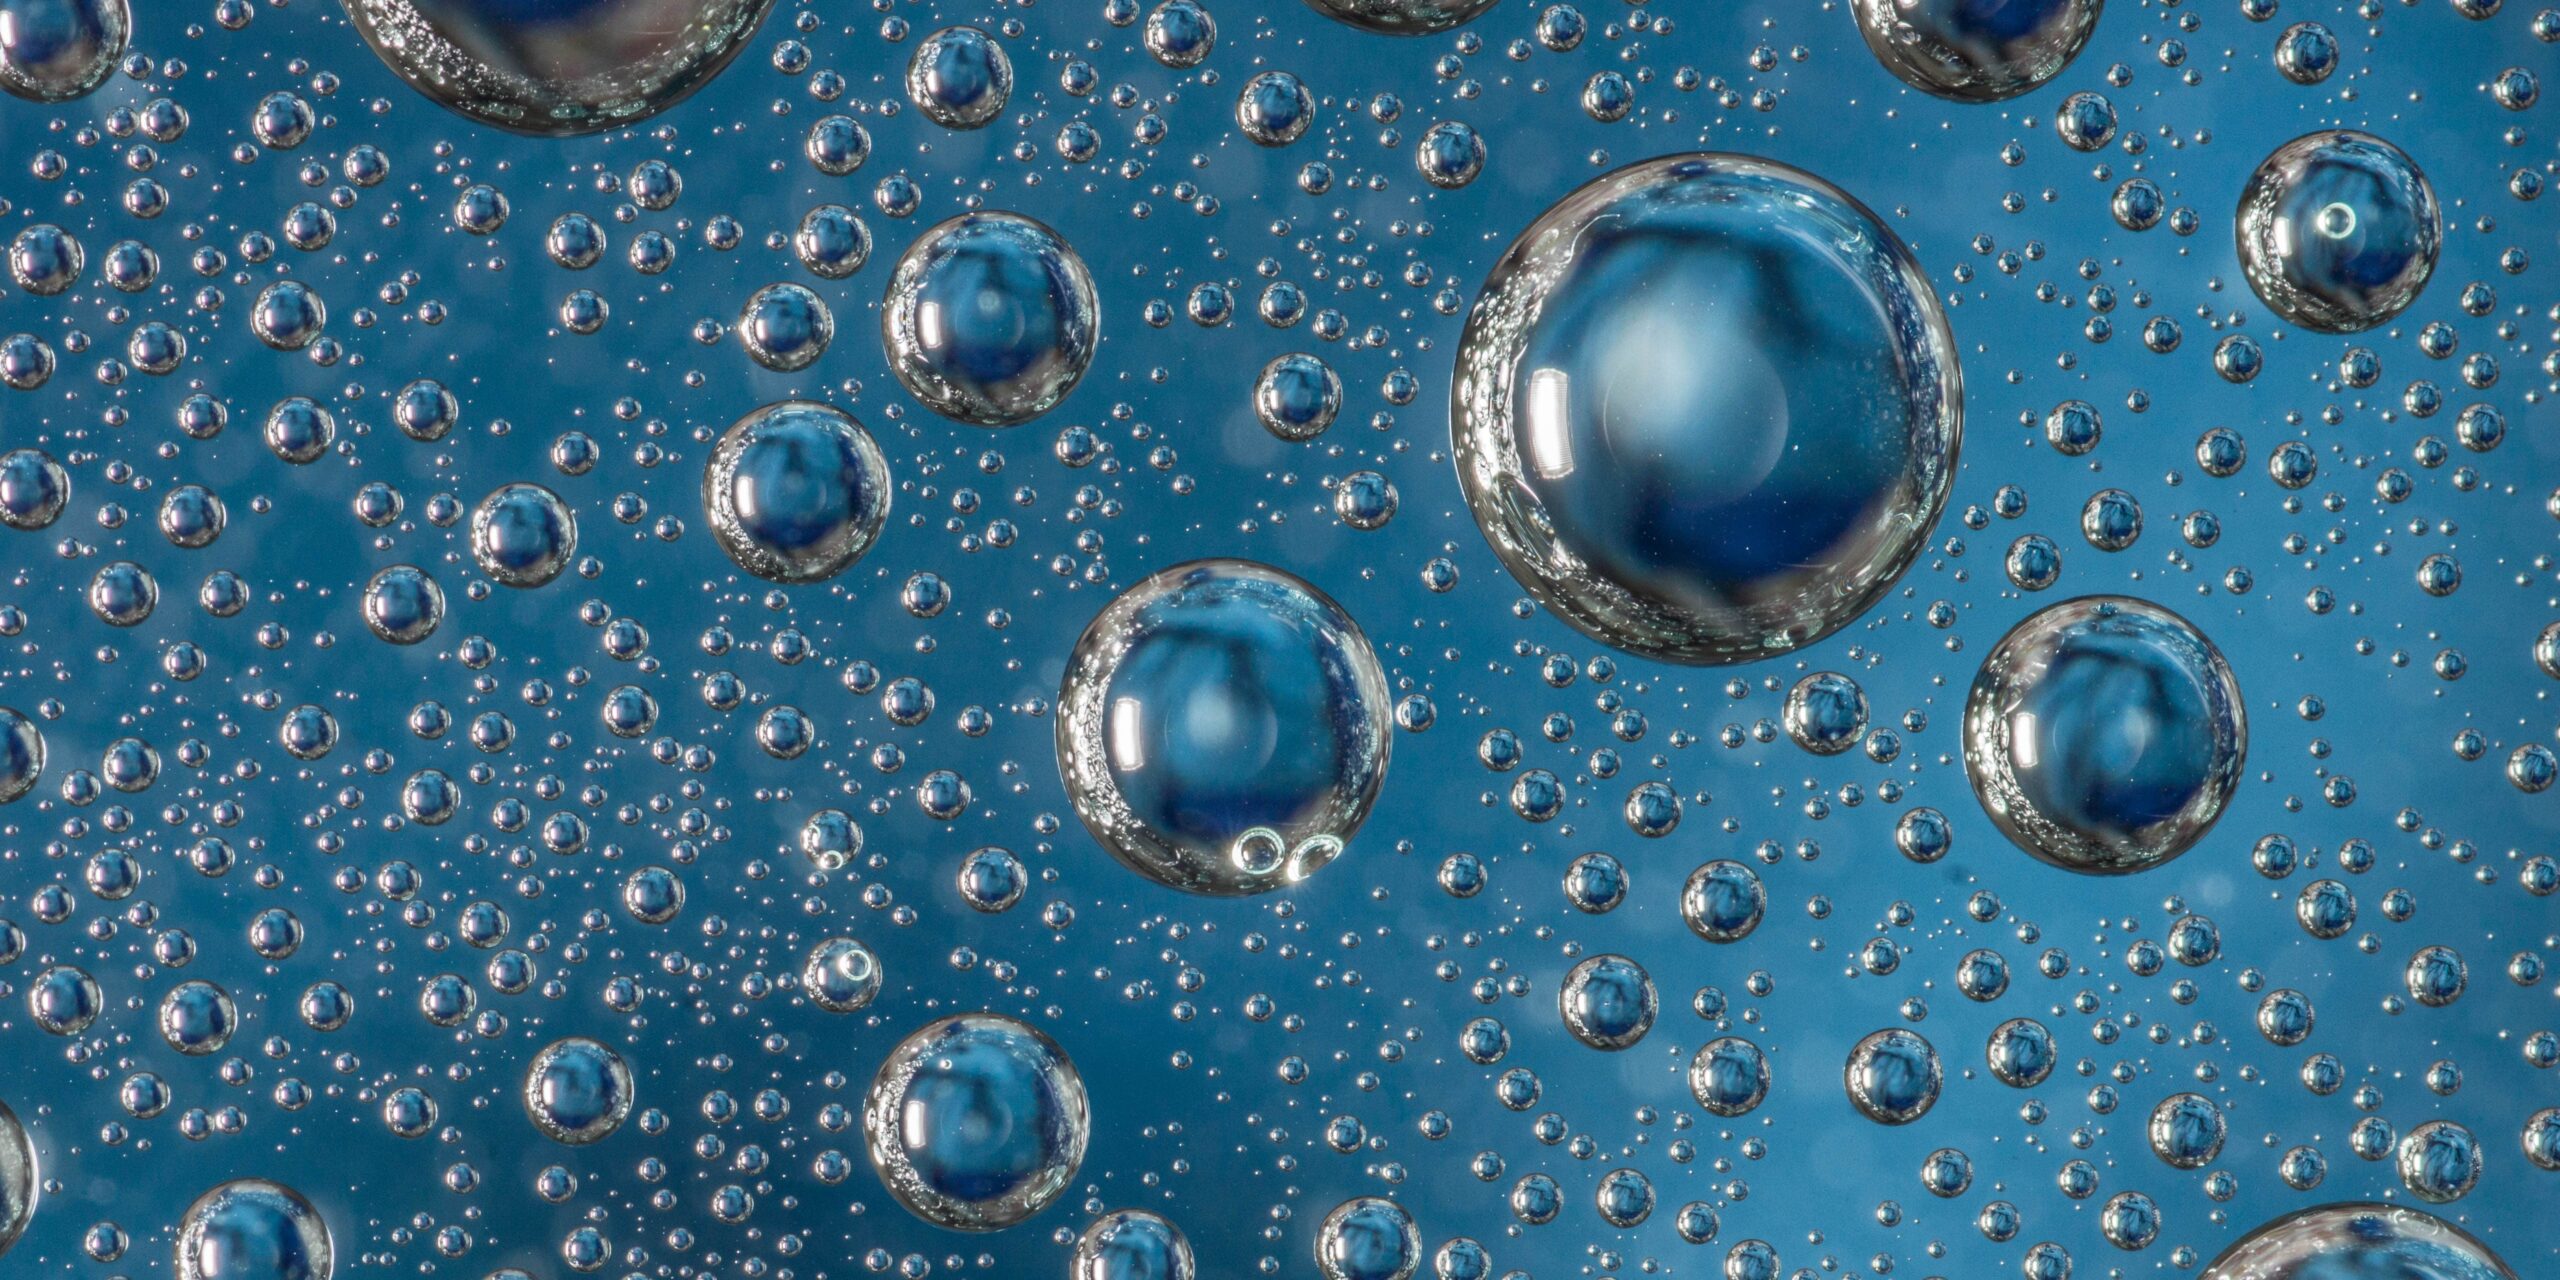 6 Major Benefits and Applications of Durable Water Repellent (DWR) Finishes​